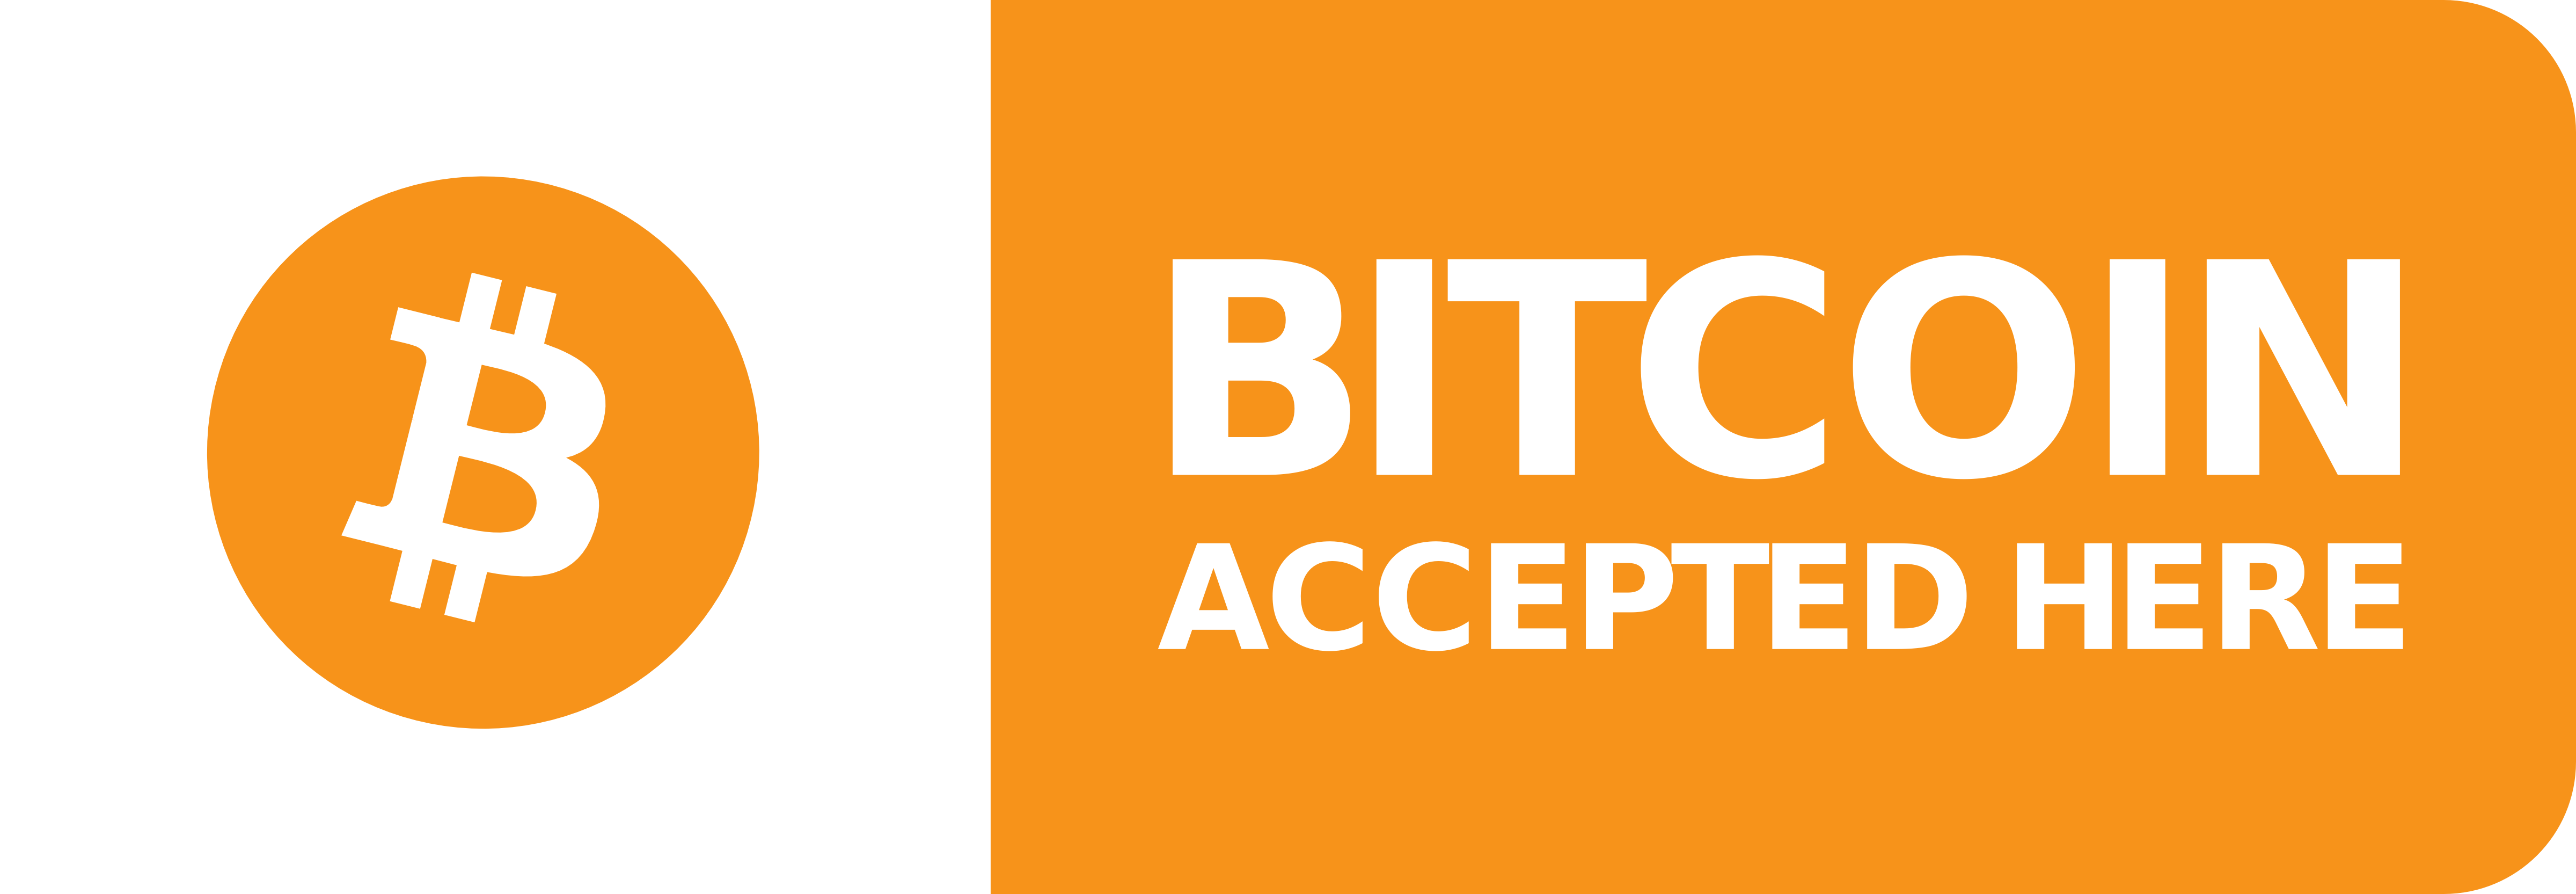 Spring Break Bitcoin? Yes – we are the first to accept it